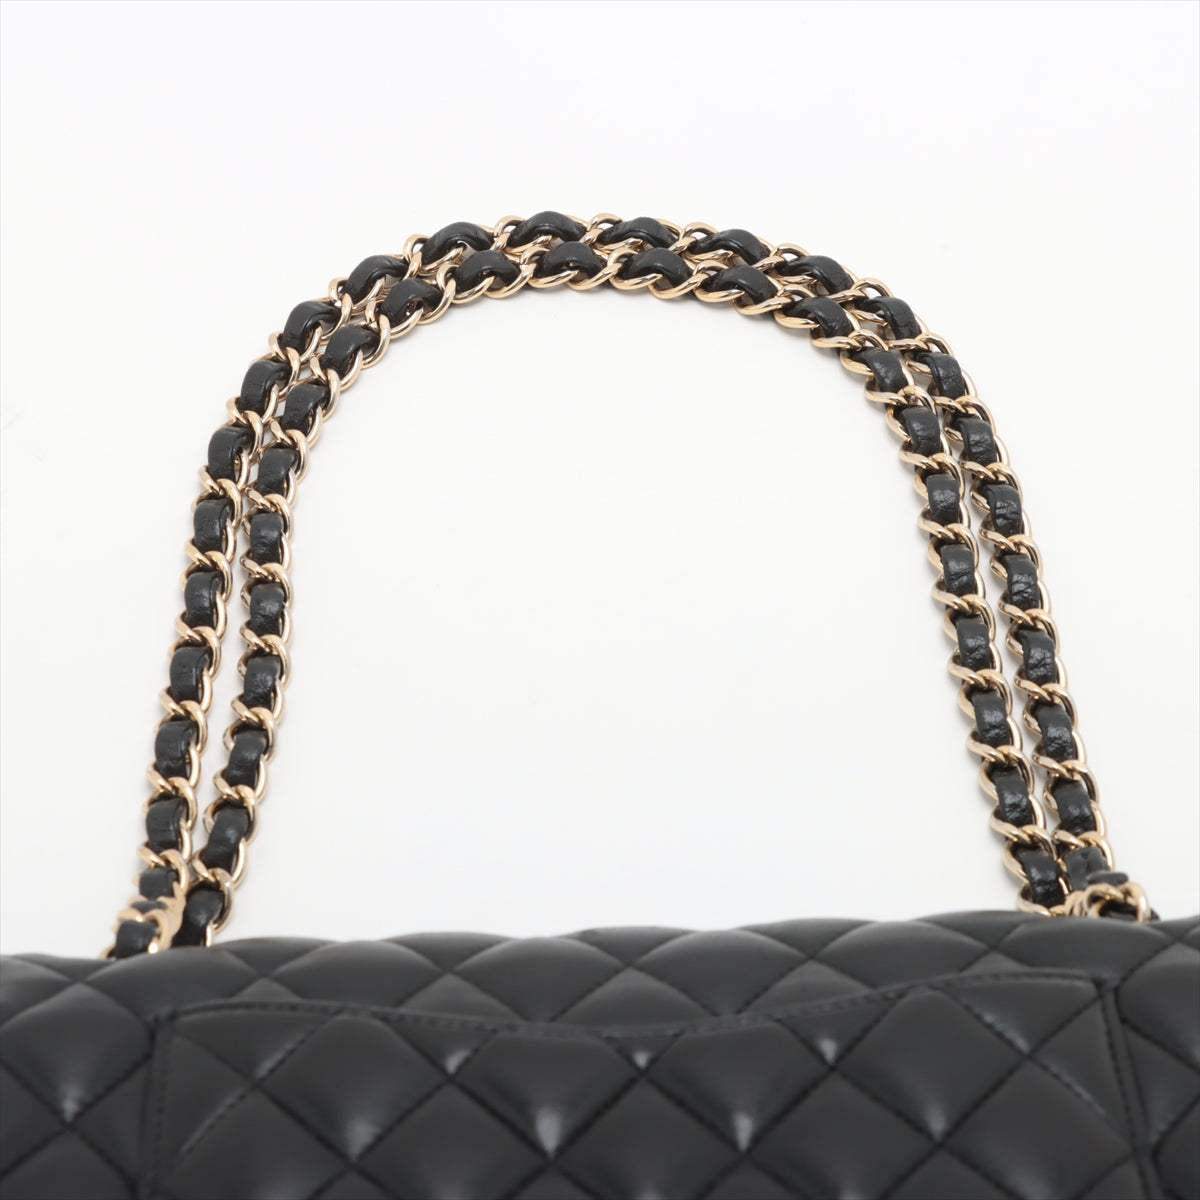 Chanel Matrasse 25  Double Flap Double Chain Bag Black G  18th A01112